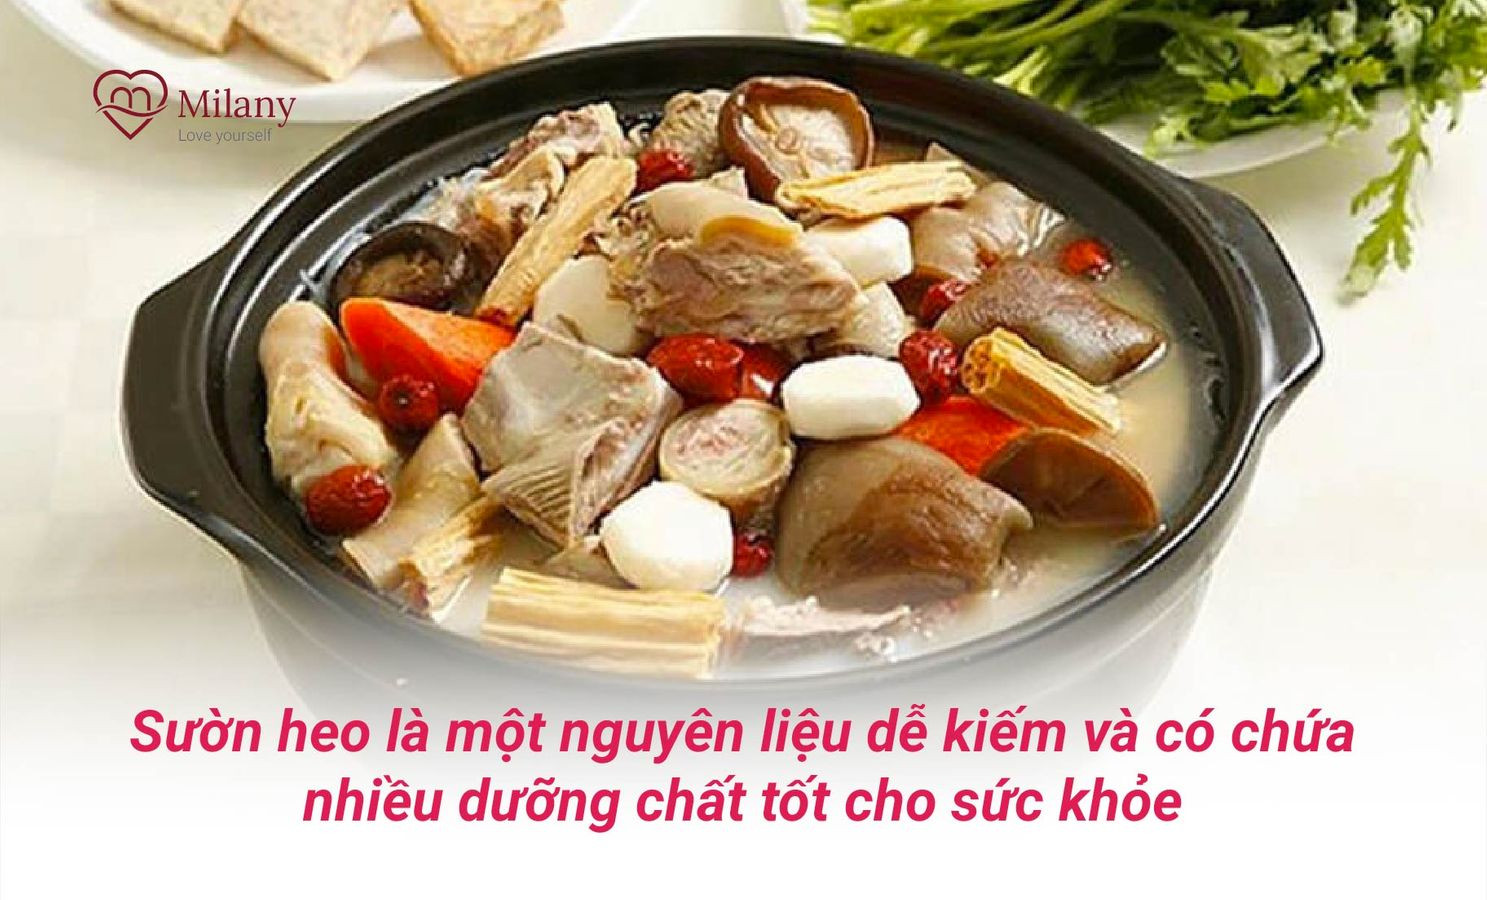 canh dong trung ha thao suon heo